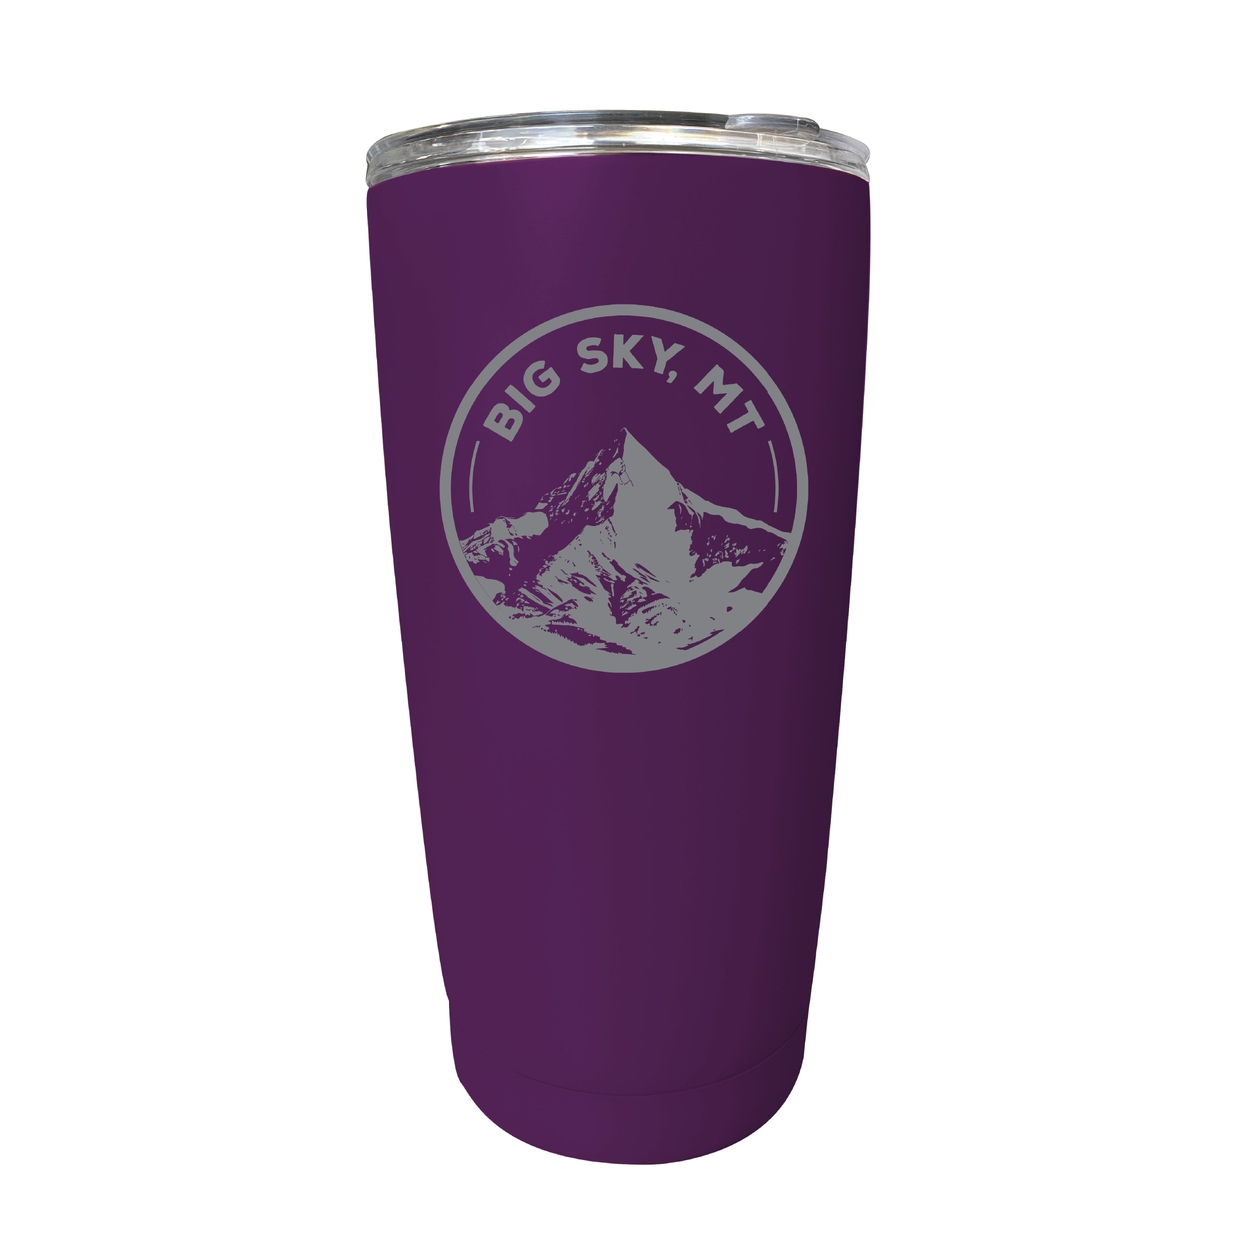 Big Sky Montana Souvenir 16 Oz Engraved Stainless Steel Insulated Tumbler - Purple,,4-Pack